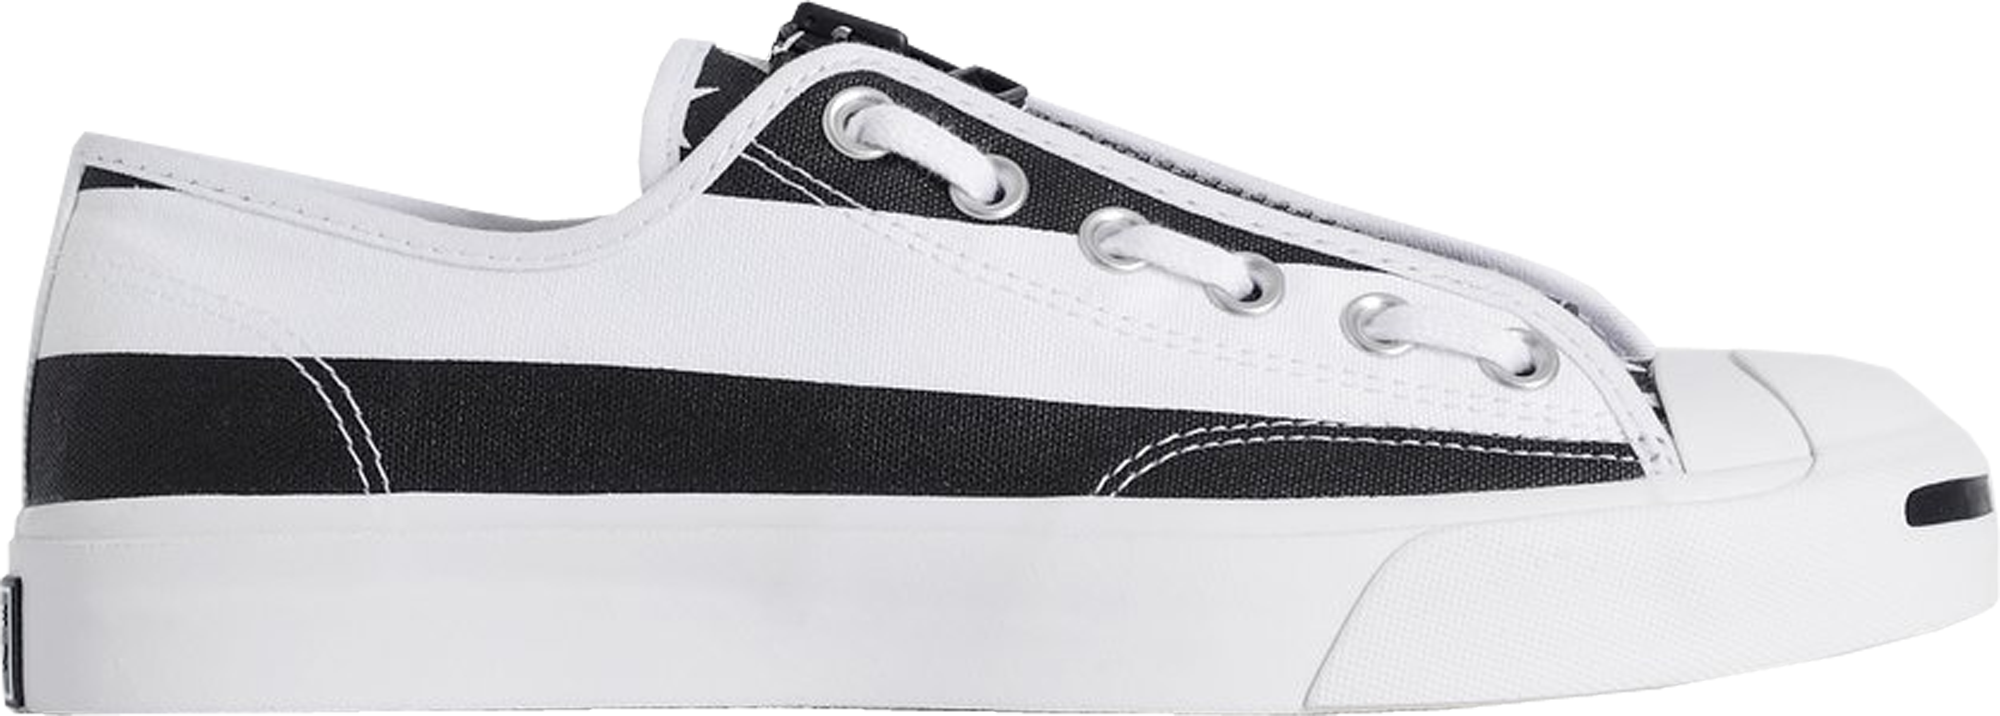 converse jack purcell ox black